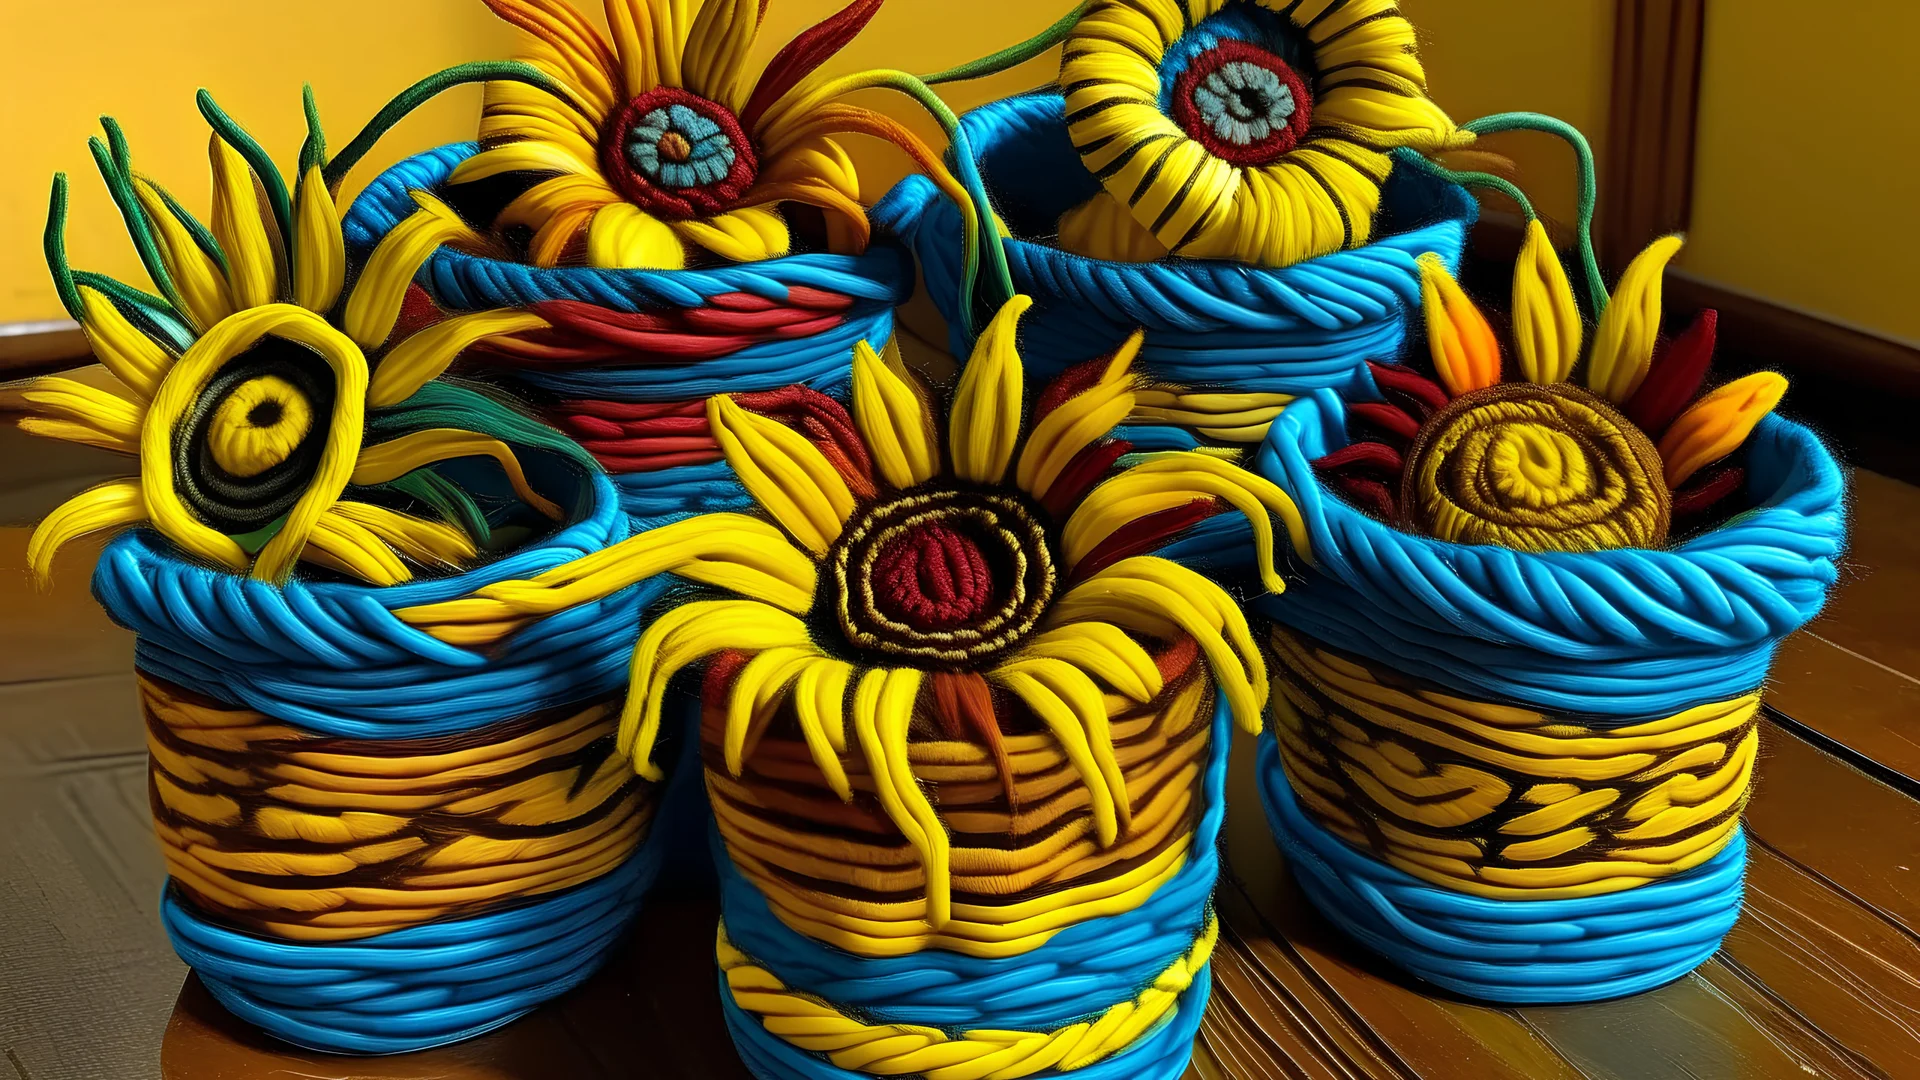 Flowers made out of Navajo yarn painted by Vincent van Gogh